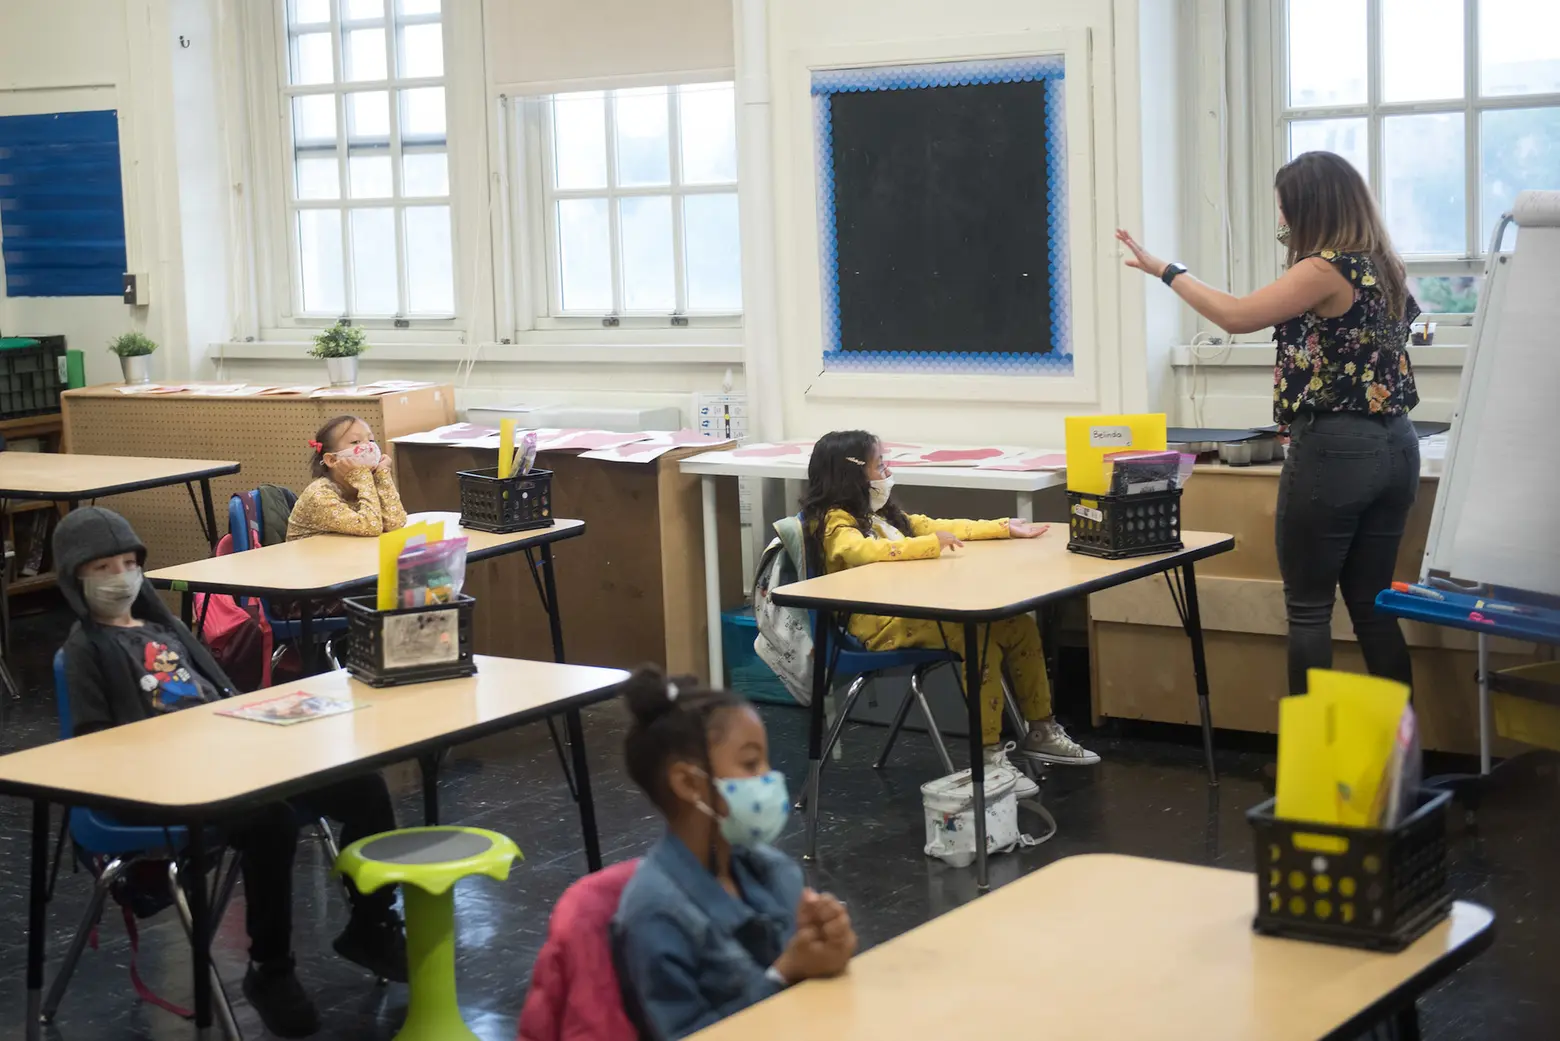 NYC public schools will fully reopen this fall without a remote option